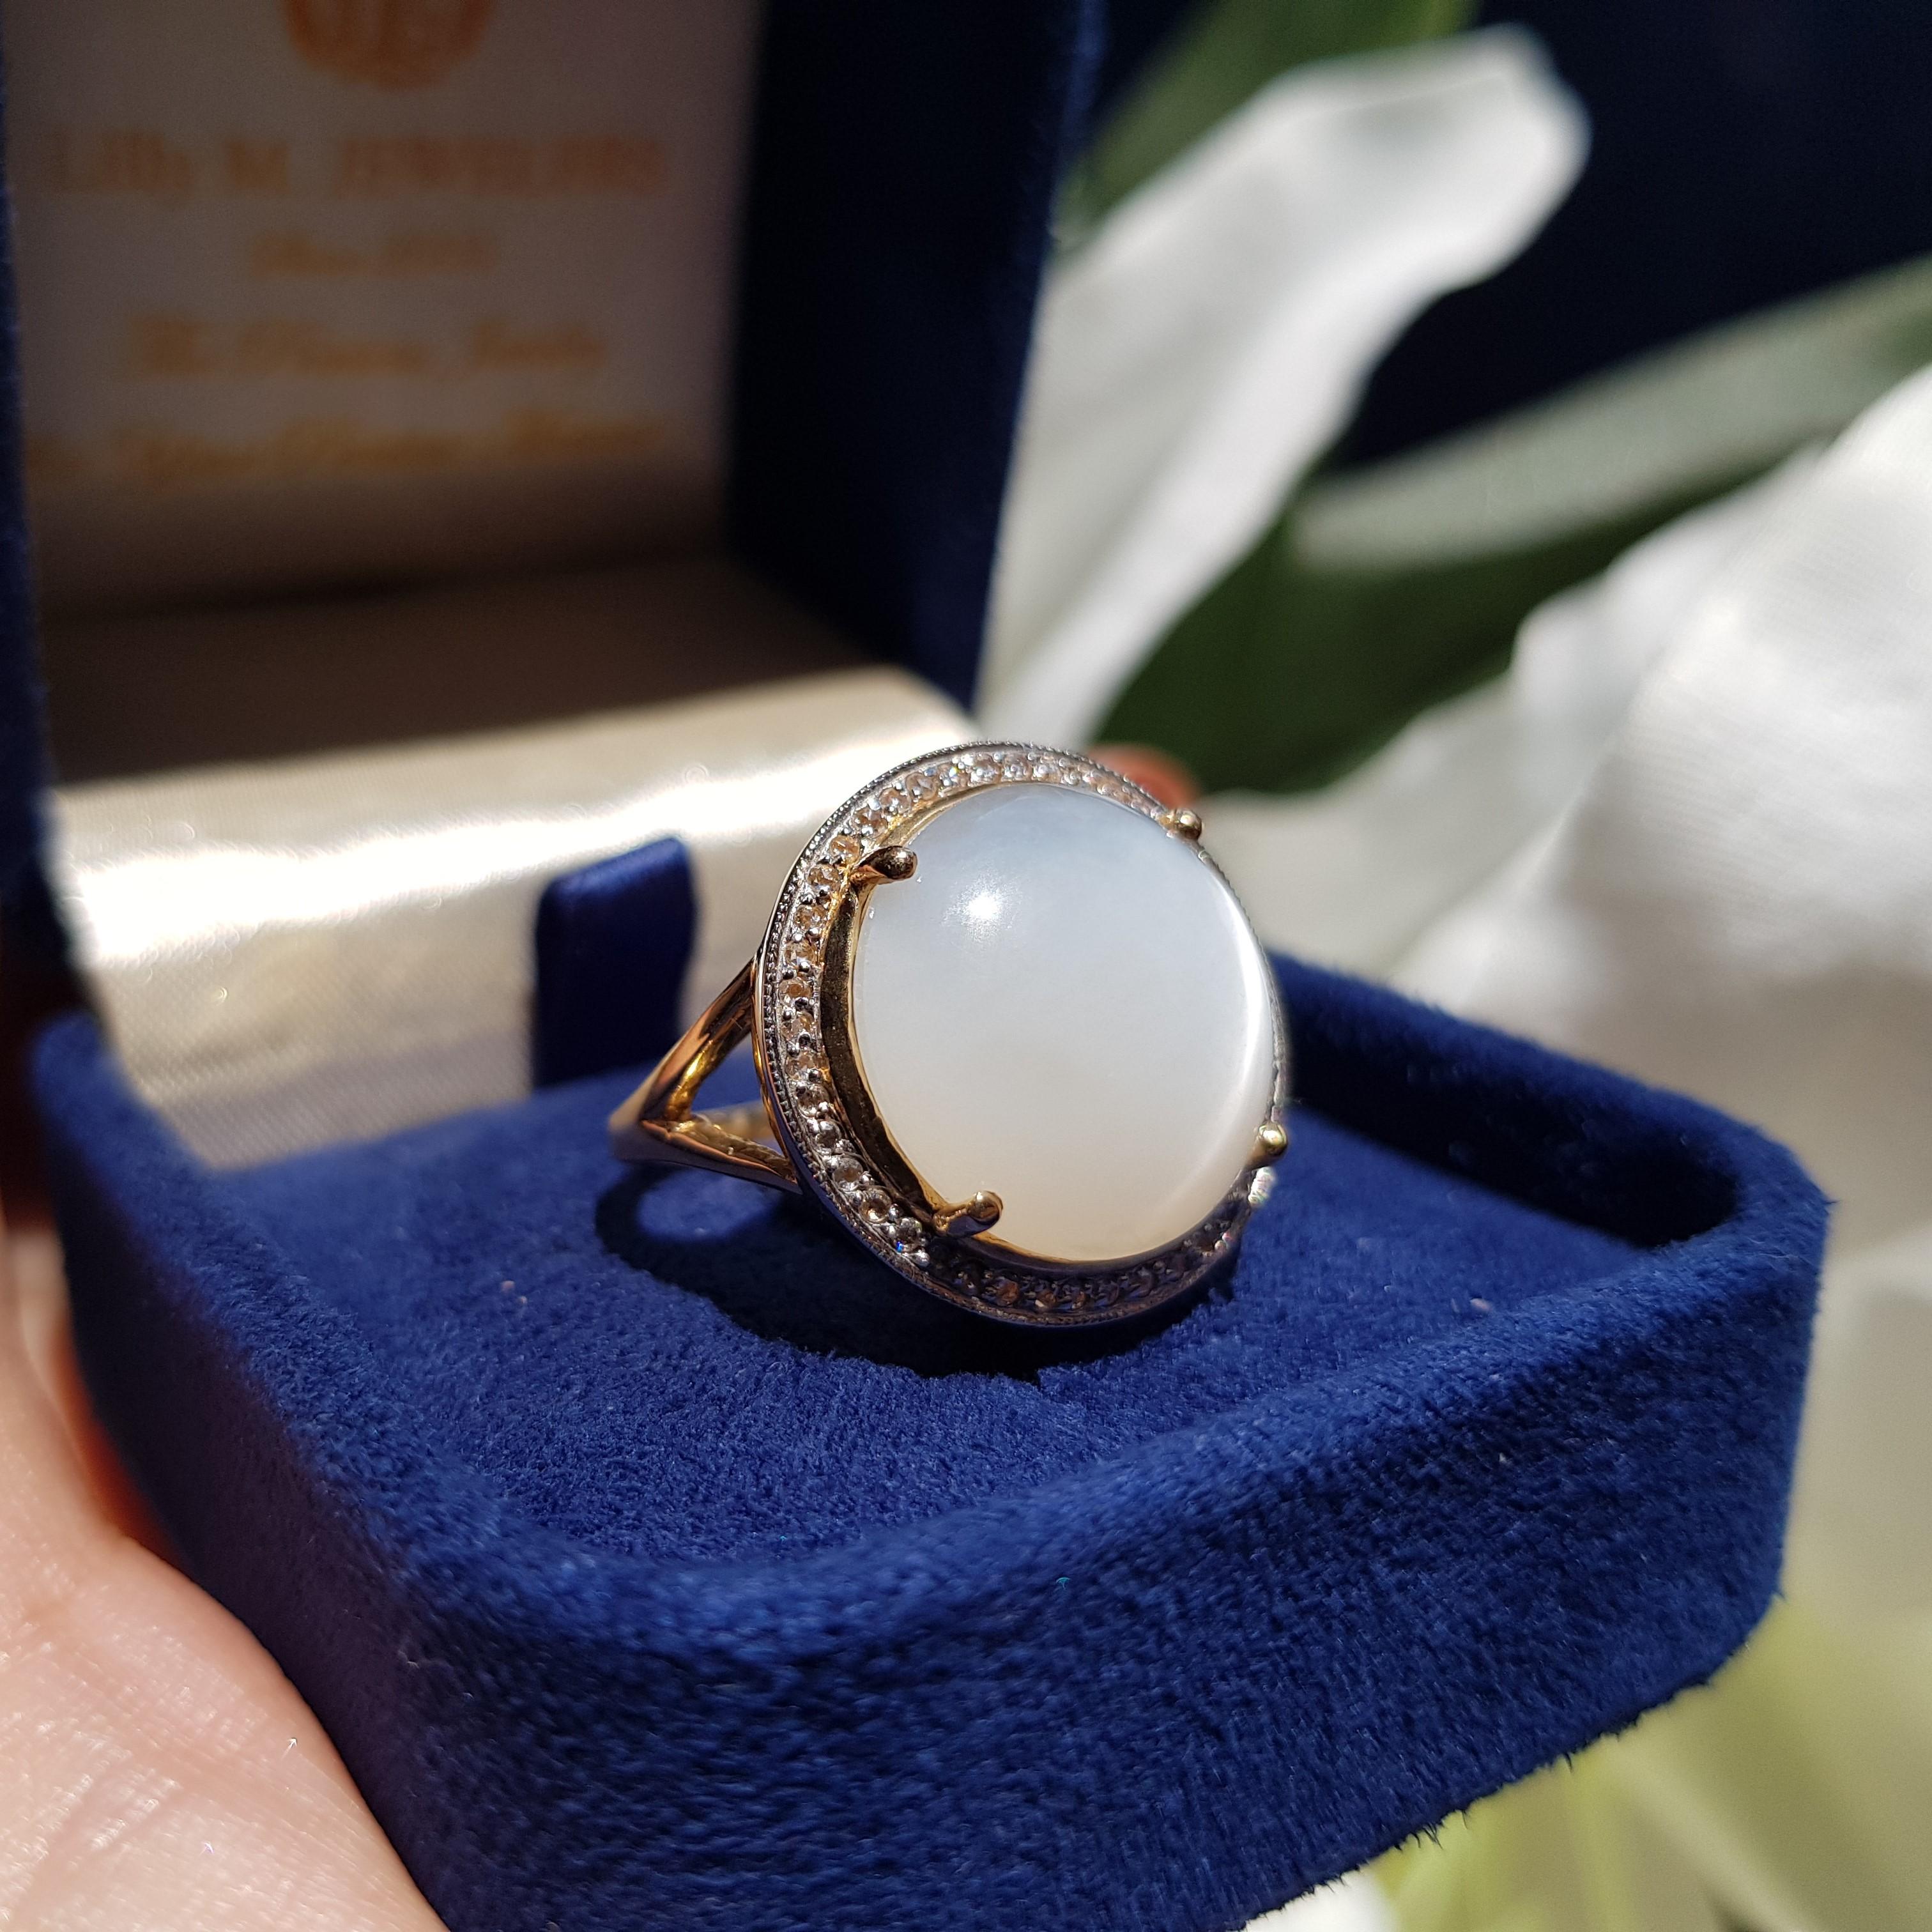 This stunning women’s fashion ring features a large round moonstone at the top, surrounded by a halo of round bright cut set diamonds, and perched atop a split yellow gold shank. The band is made of 9k yellow gold, and it’s softly rounded on top. It